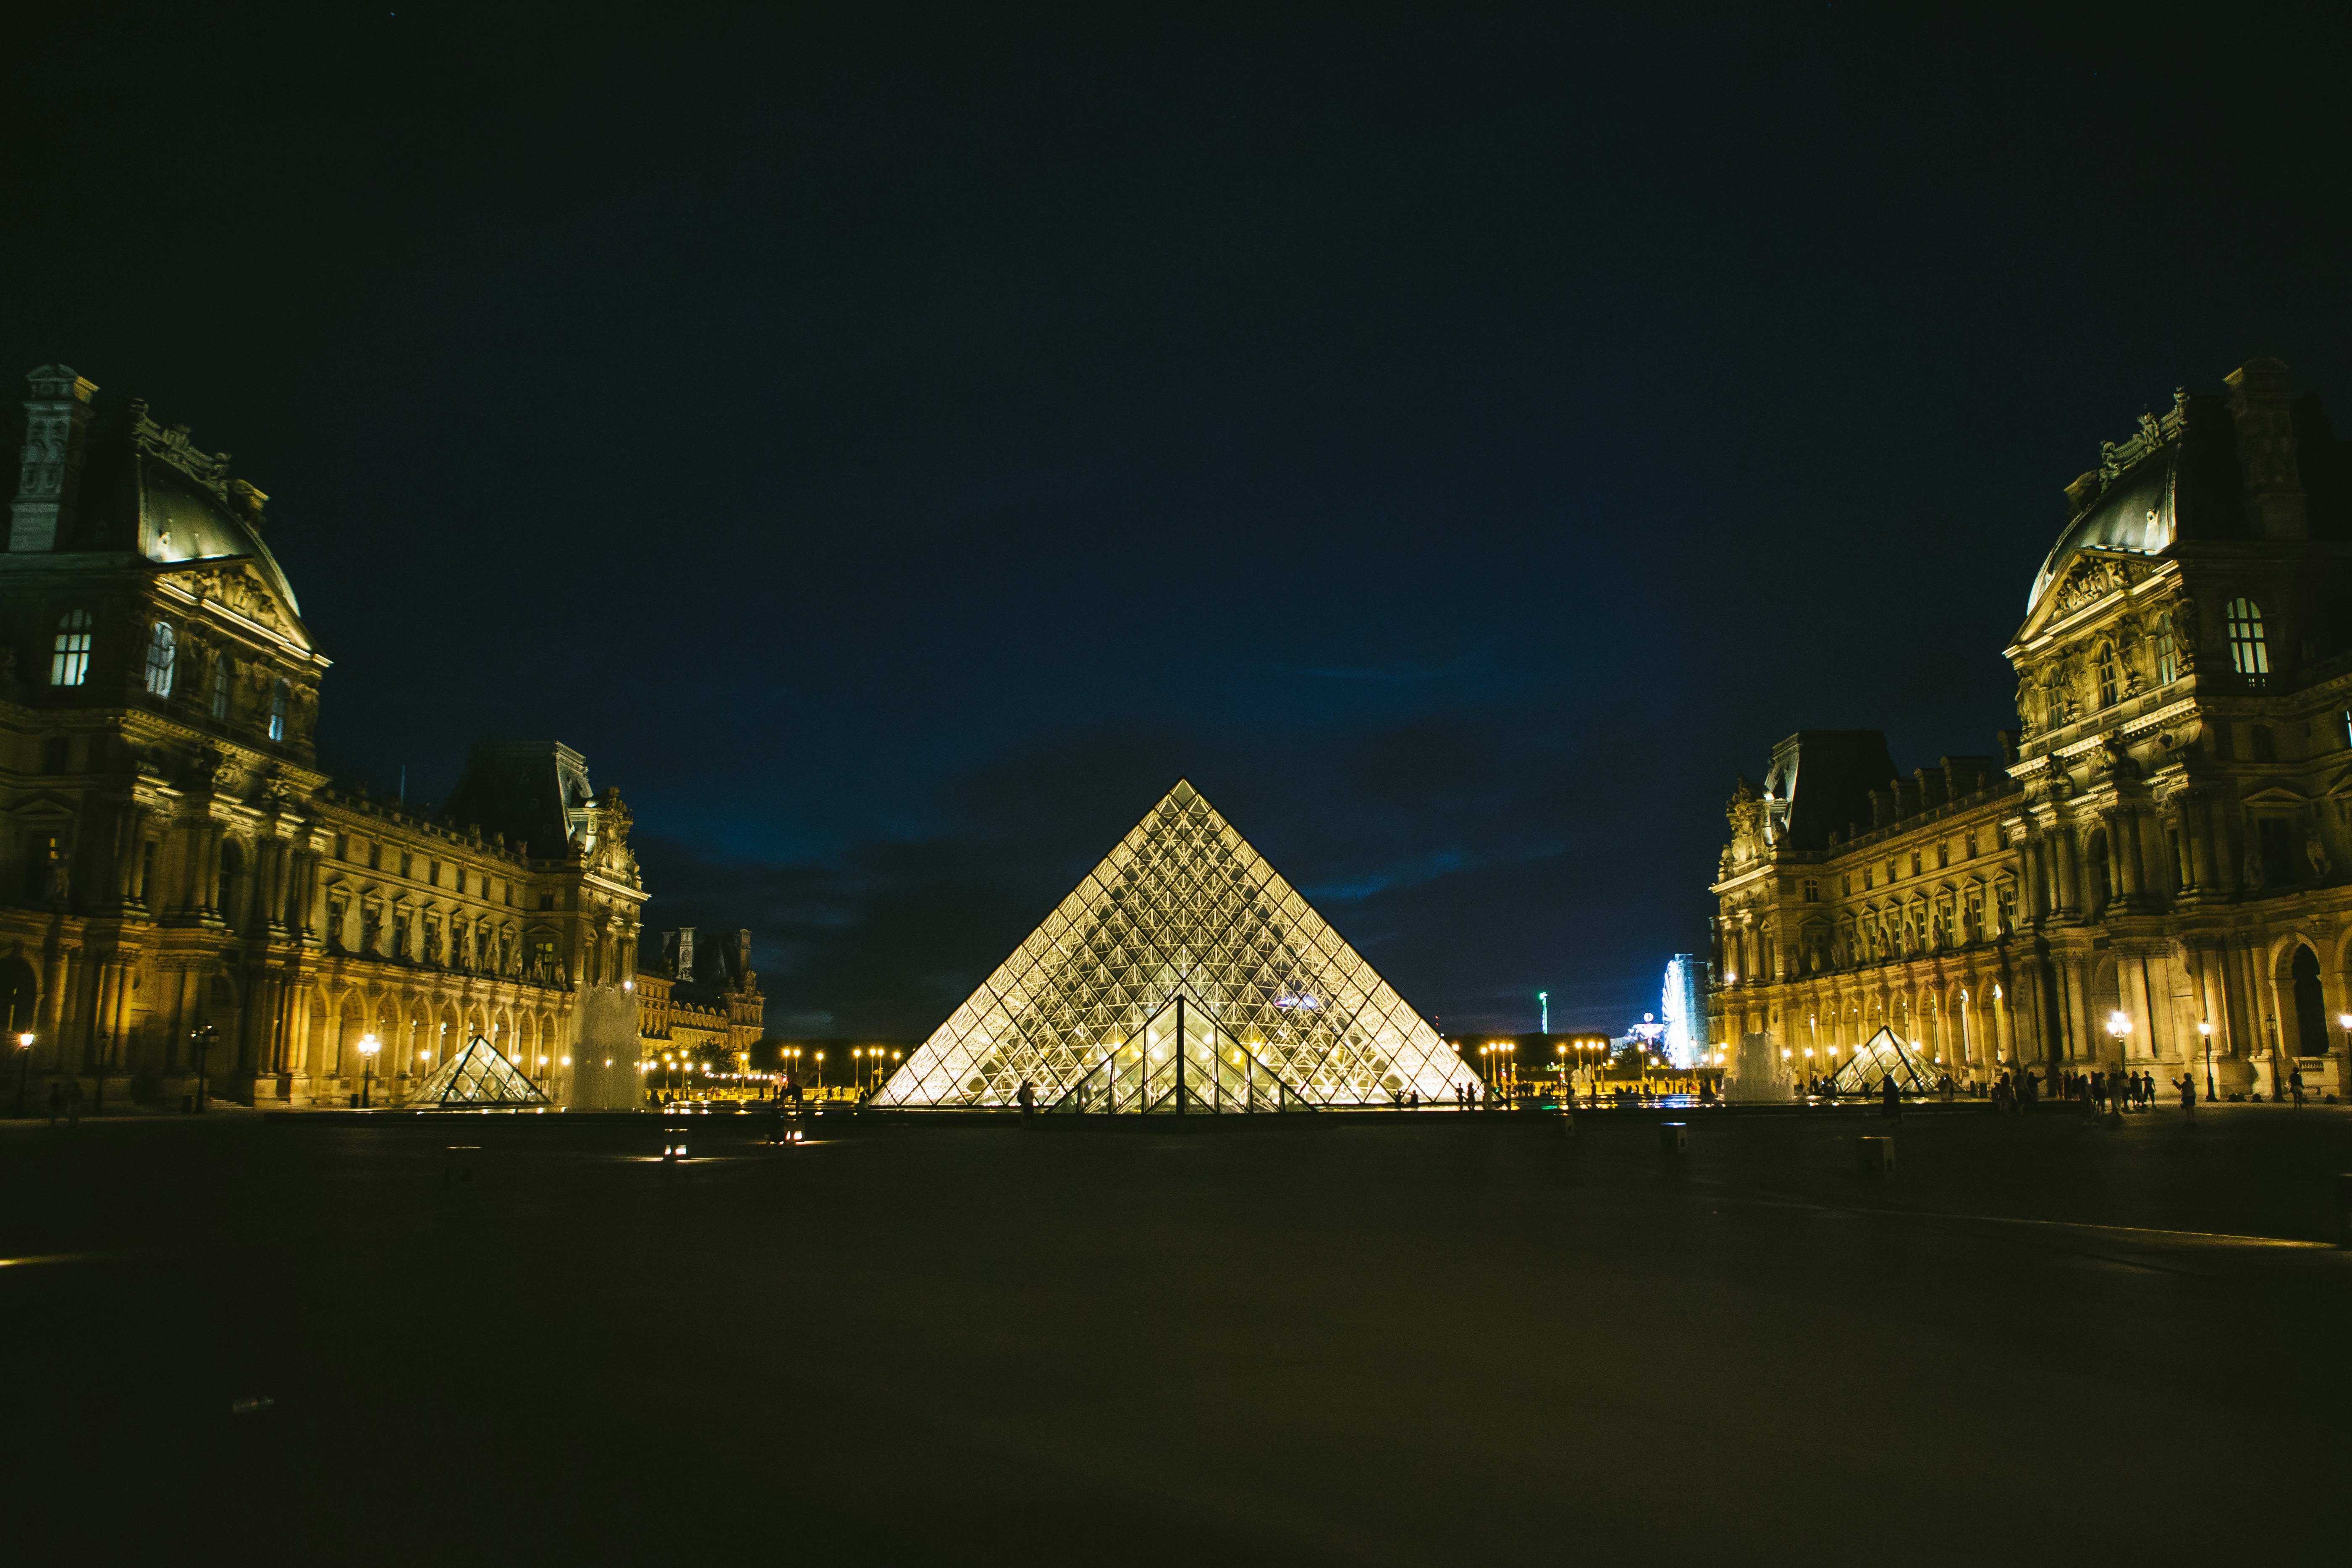 On my first trip outside of North America, I was backpacking in Europe. Though the city was very busy, the Musée du Louvre was very quiet in the middle of the night.